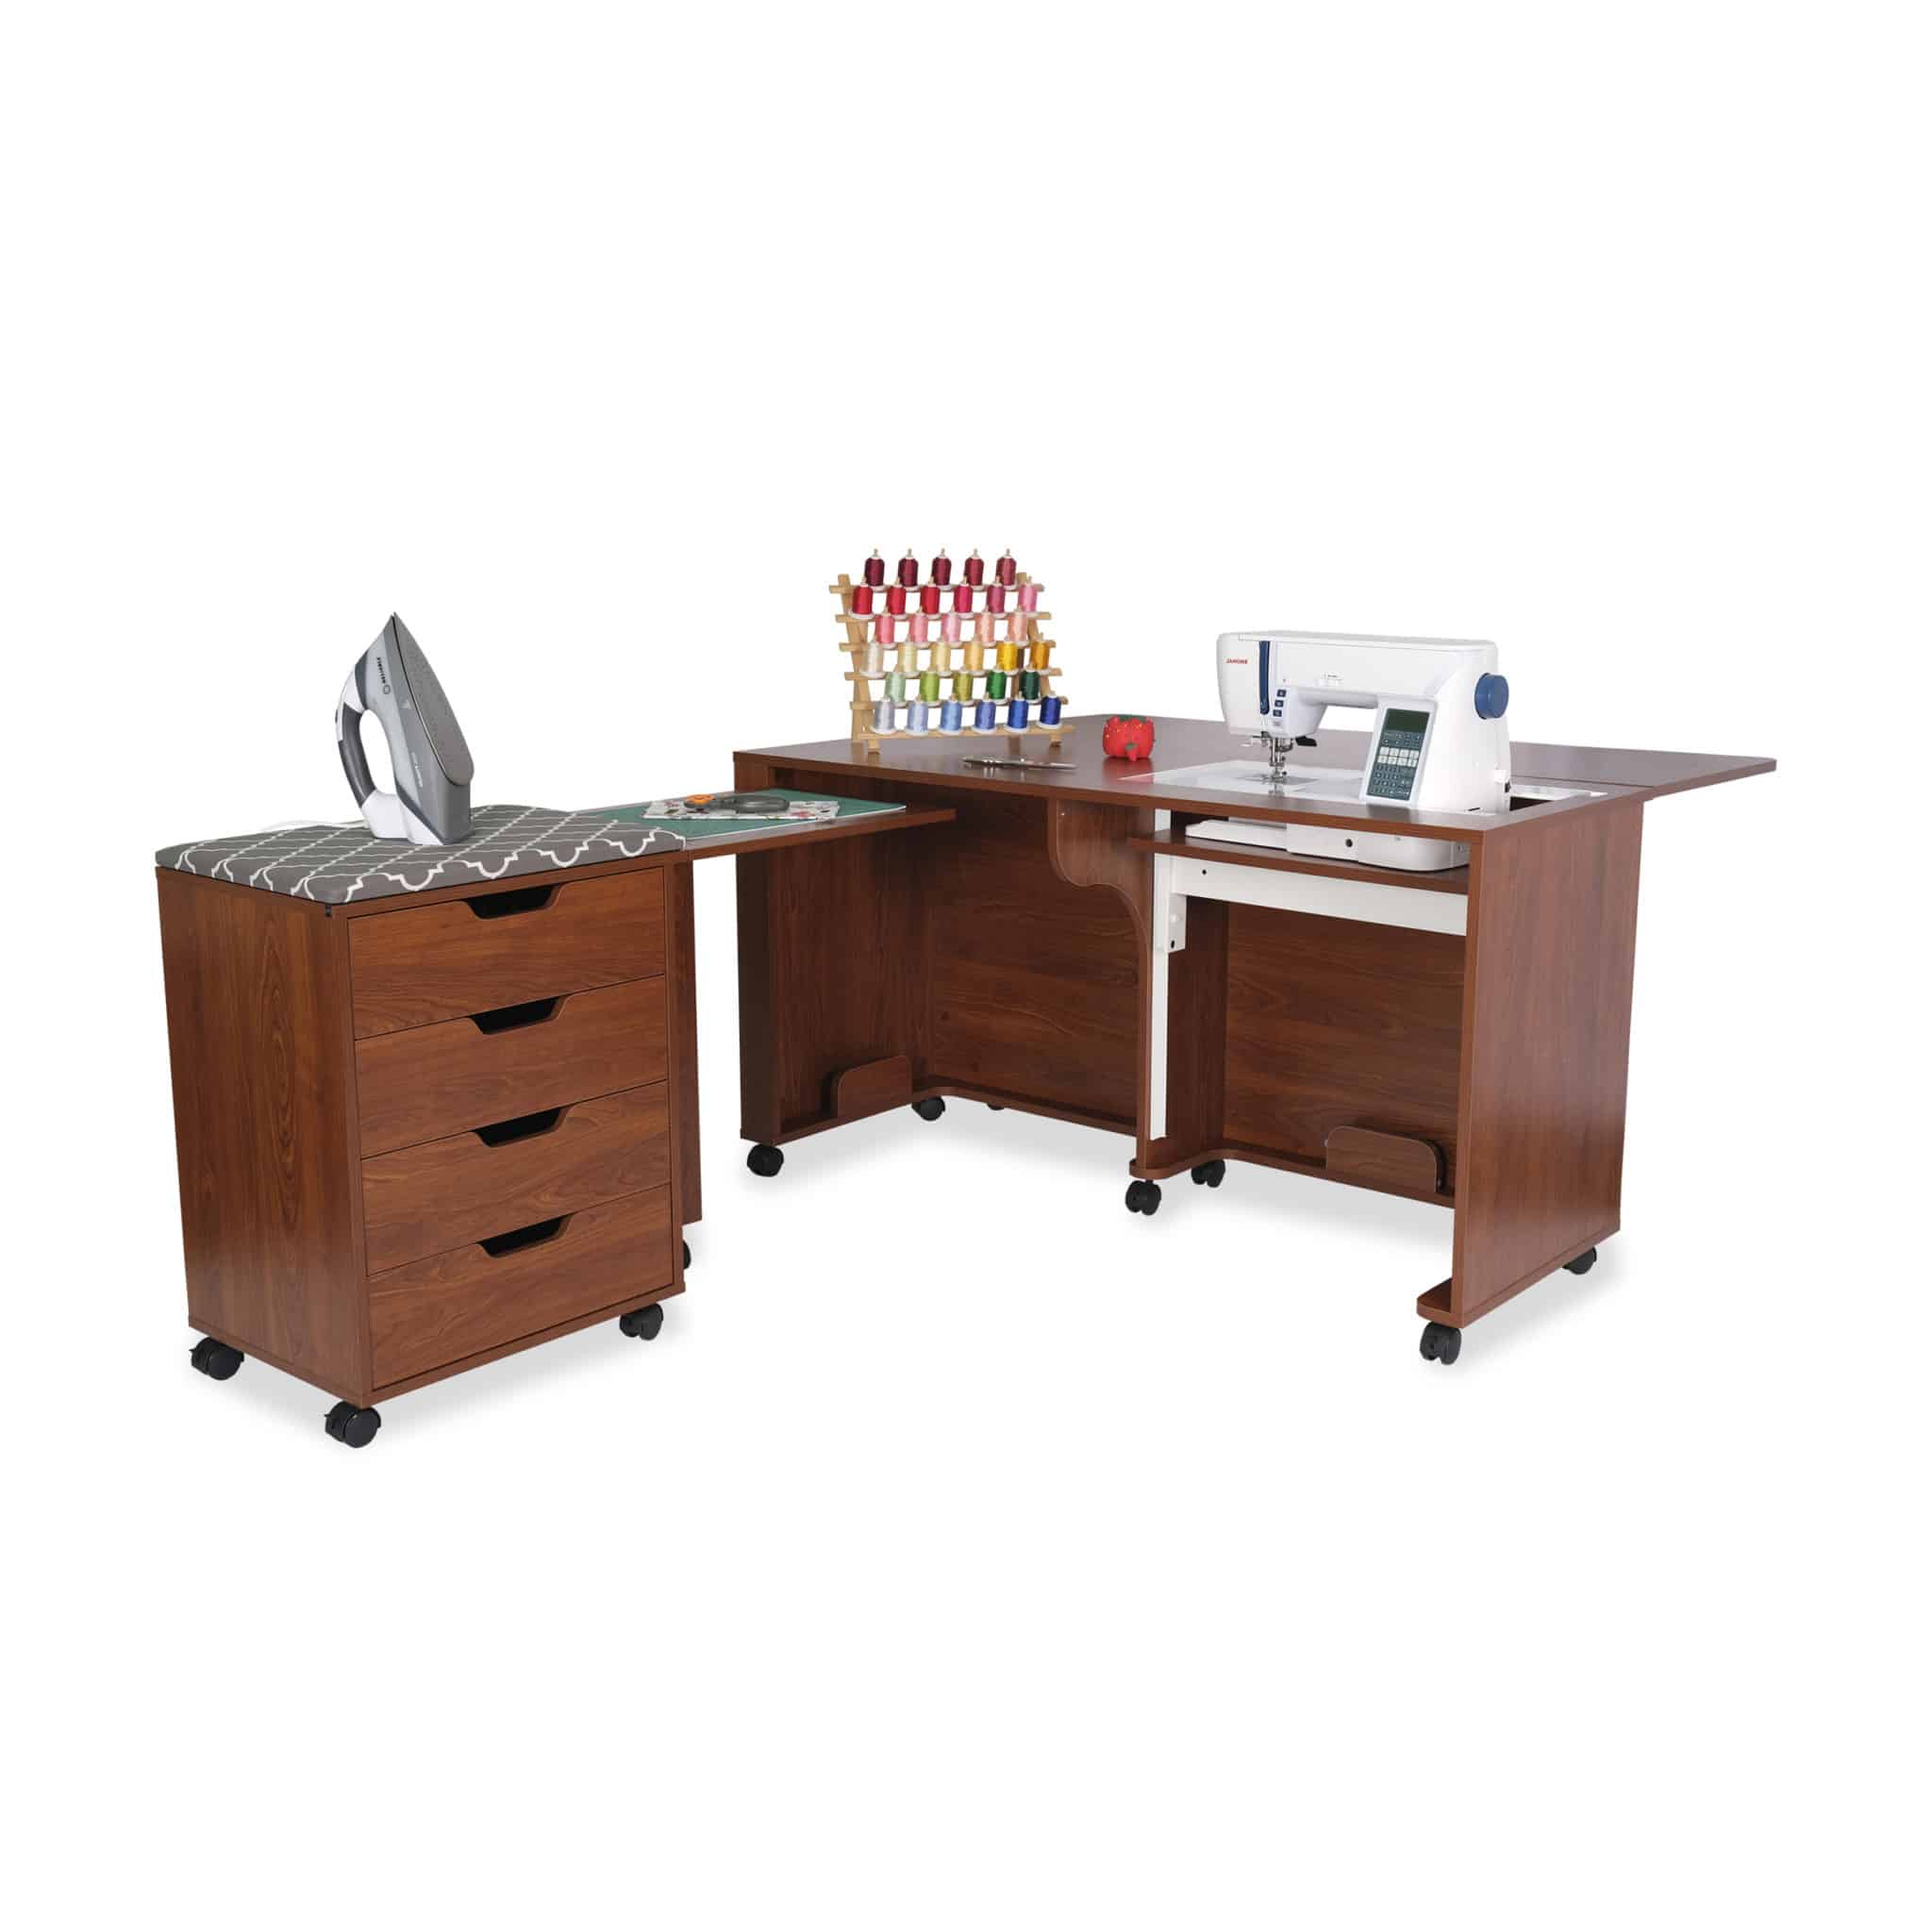 Laverne Sewing Cabinet with Shirley 4 Drawer Storage Cabinet *Save $10 –  She Sewing Tables